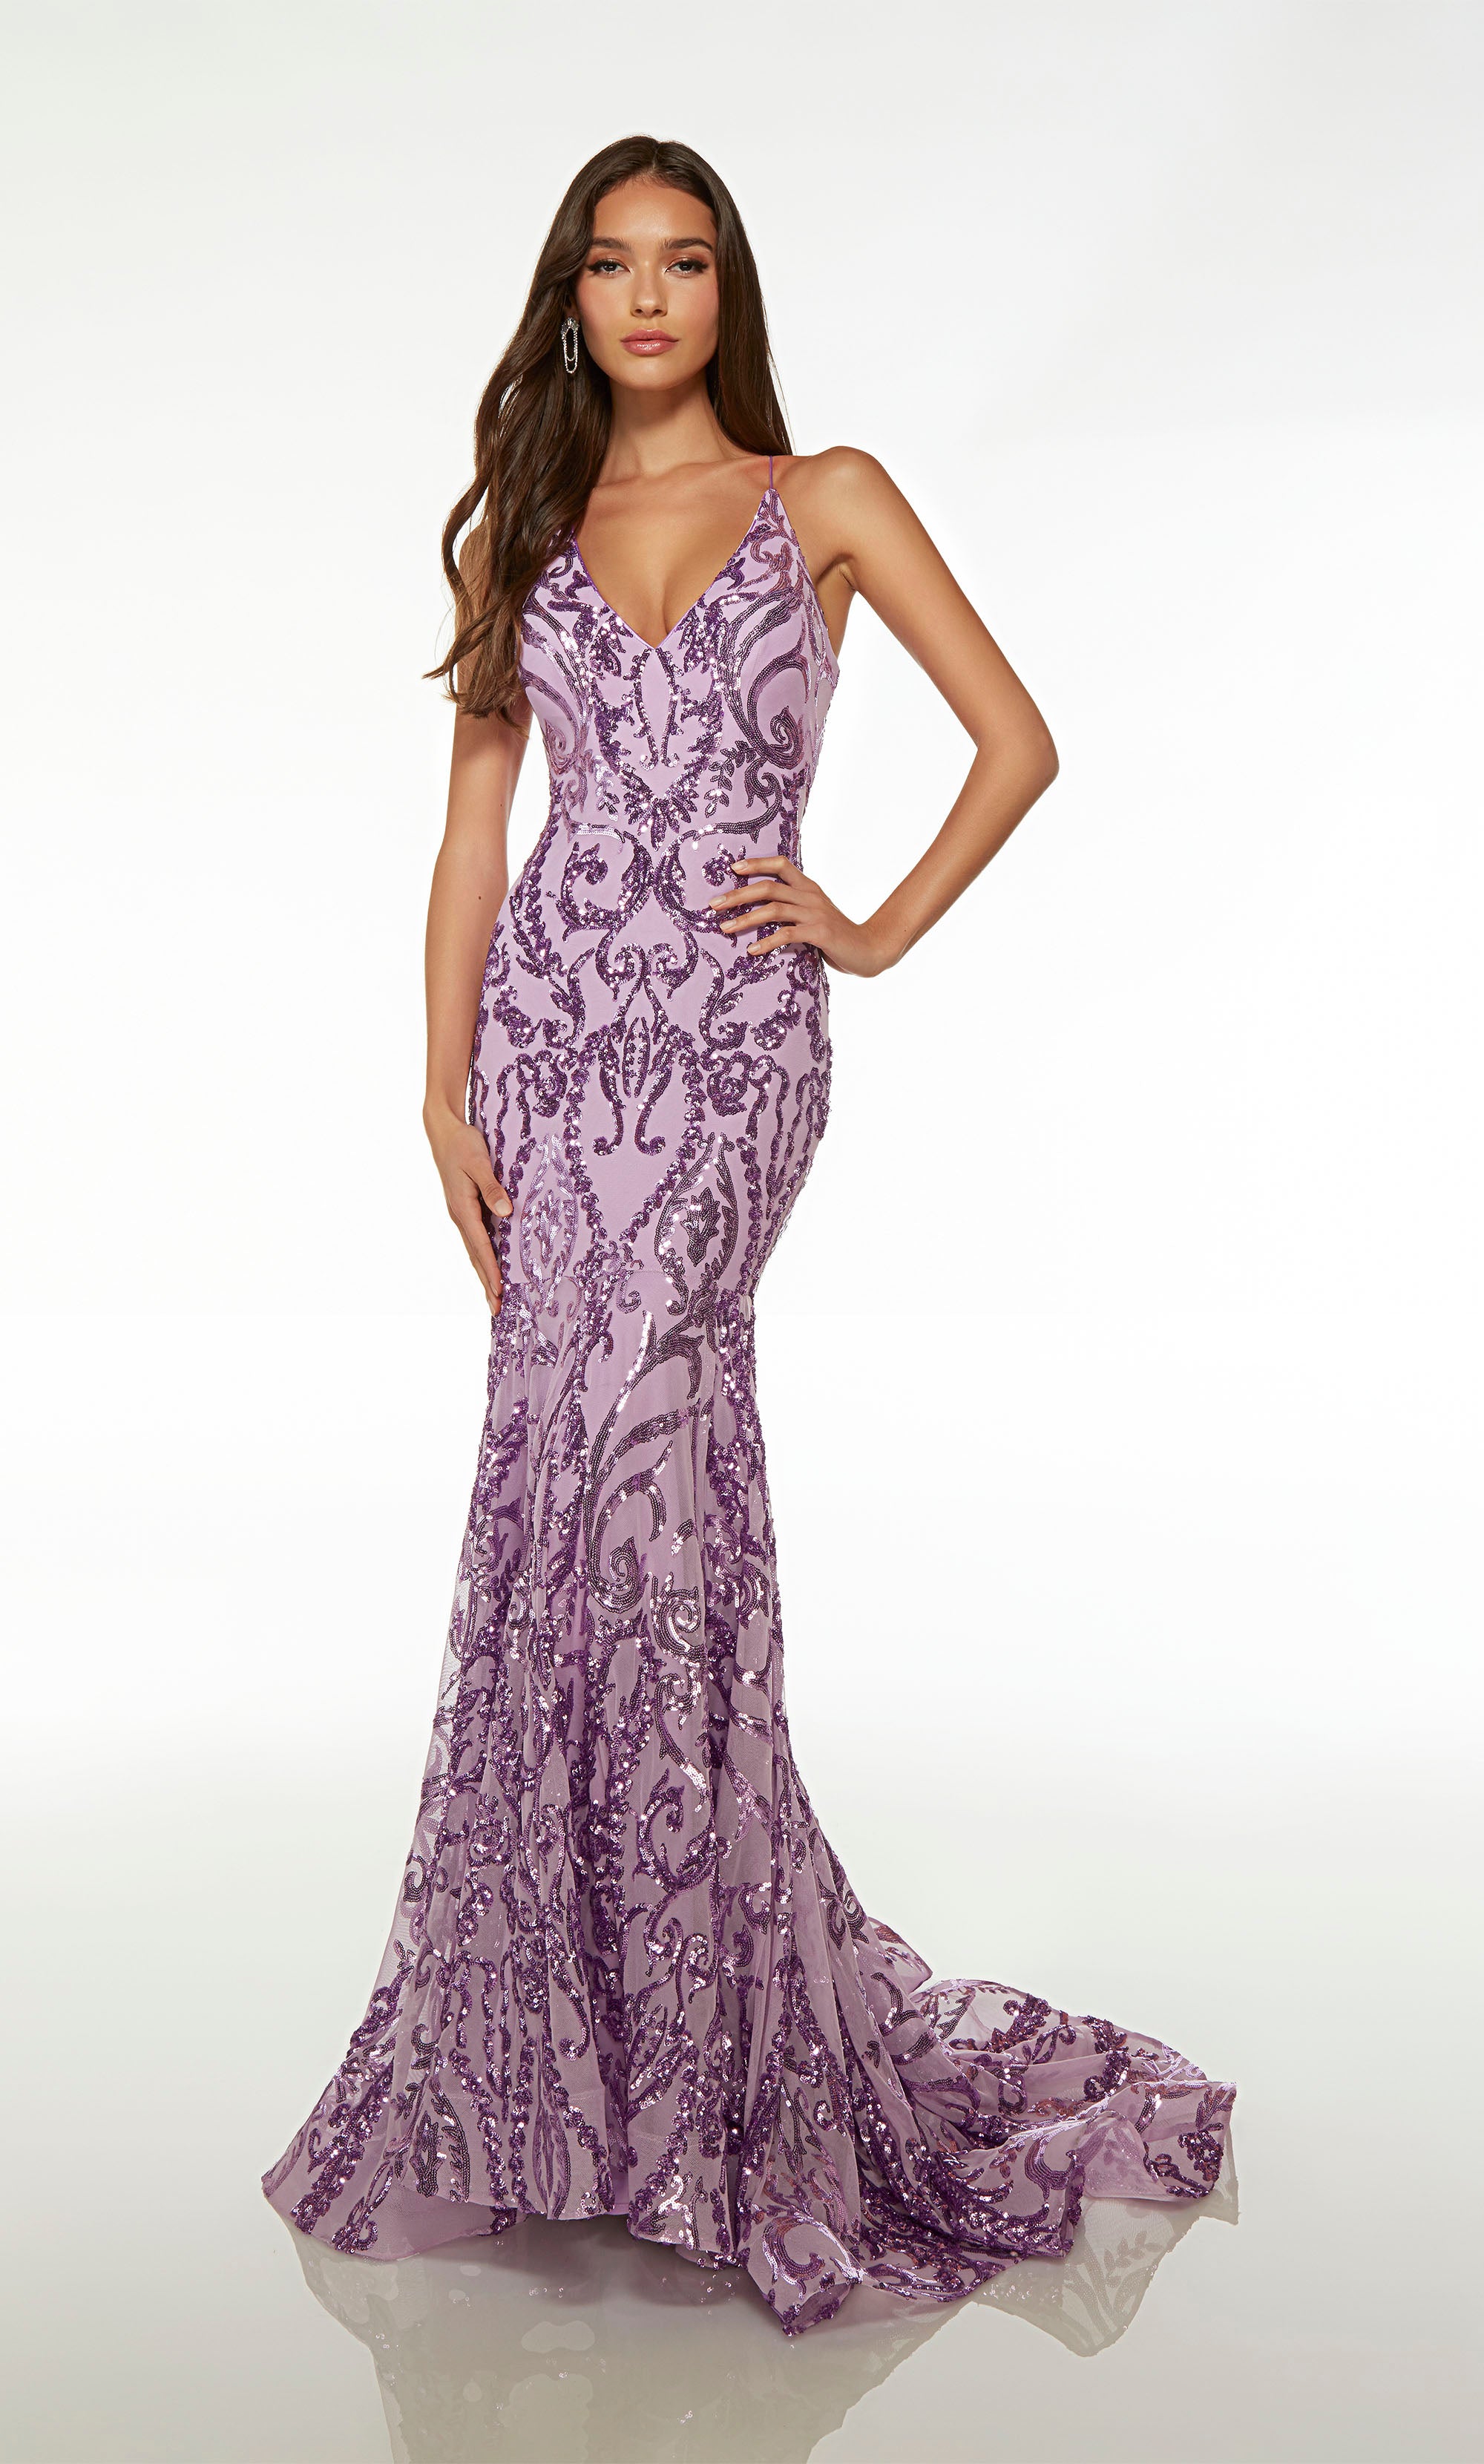 Purple mermaid dress featuring an plunging V neckline, crisscross lace-up back, long train, and paisley-patterned sequin design for an captivating look.